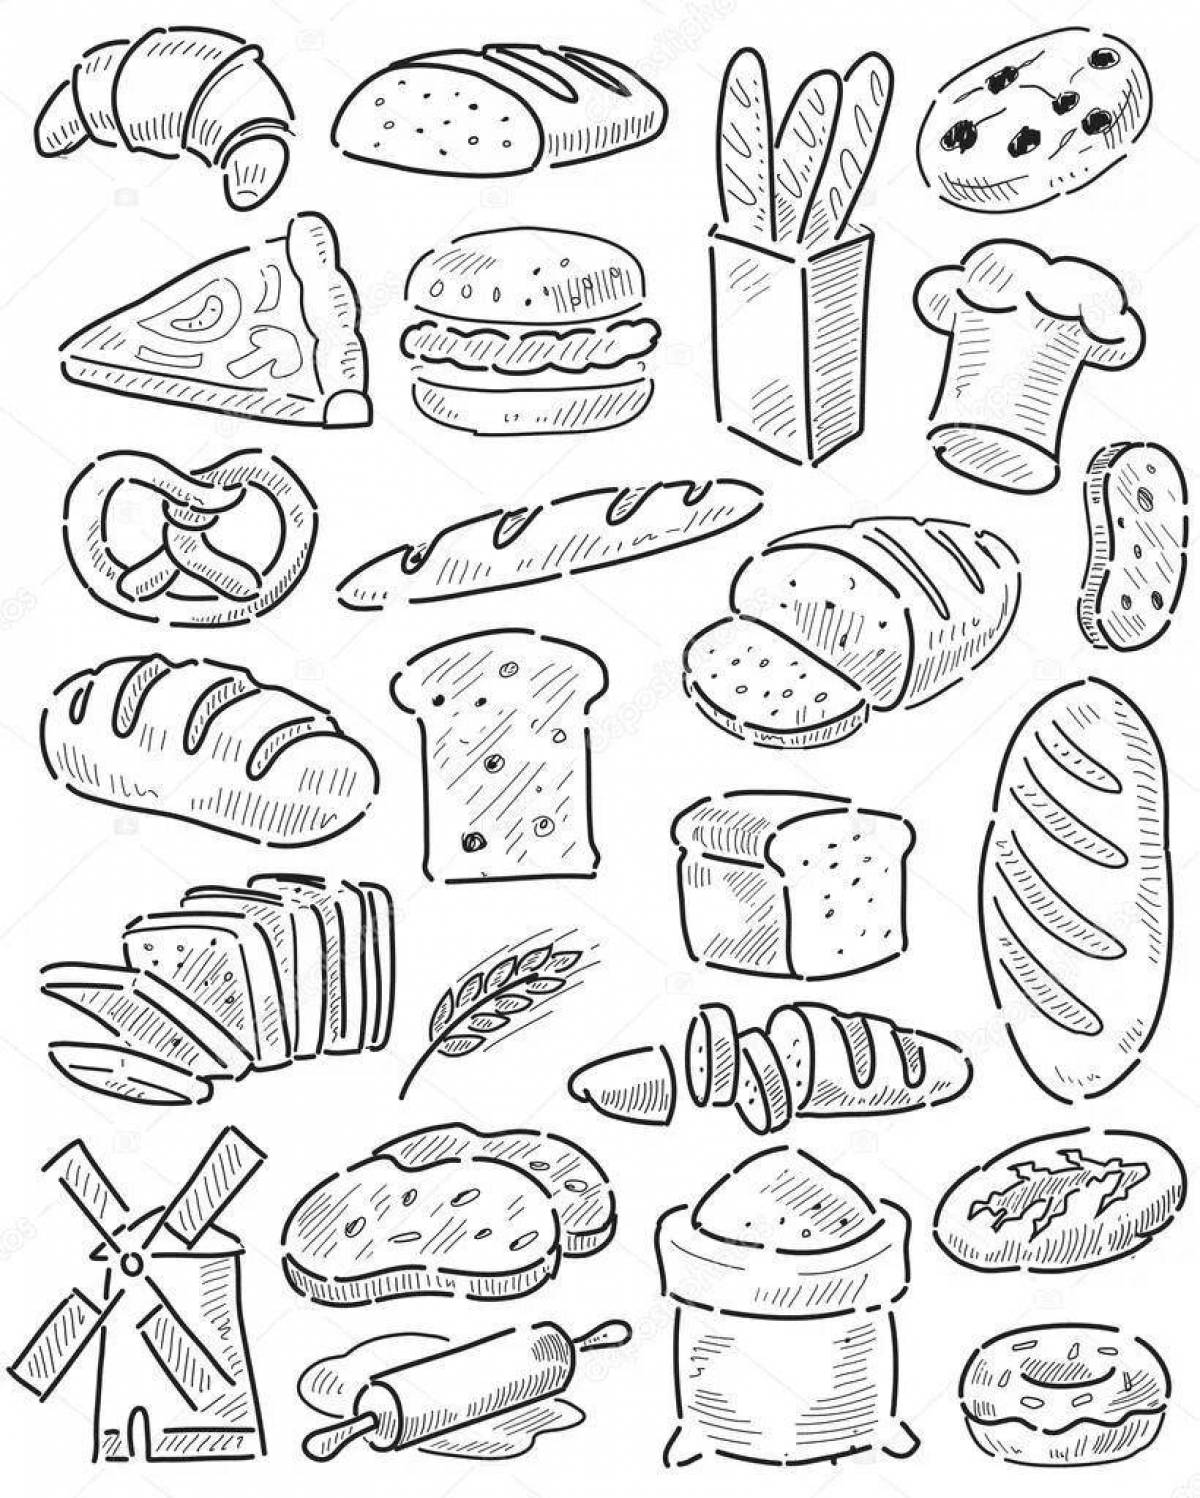 Bread filling coloring page